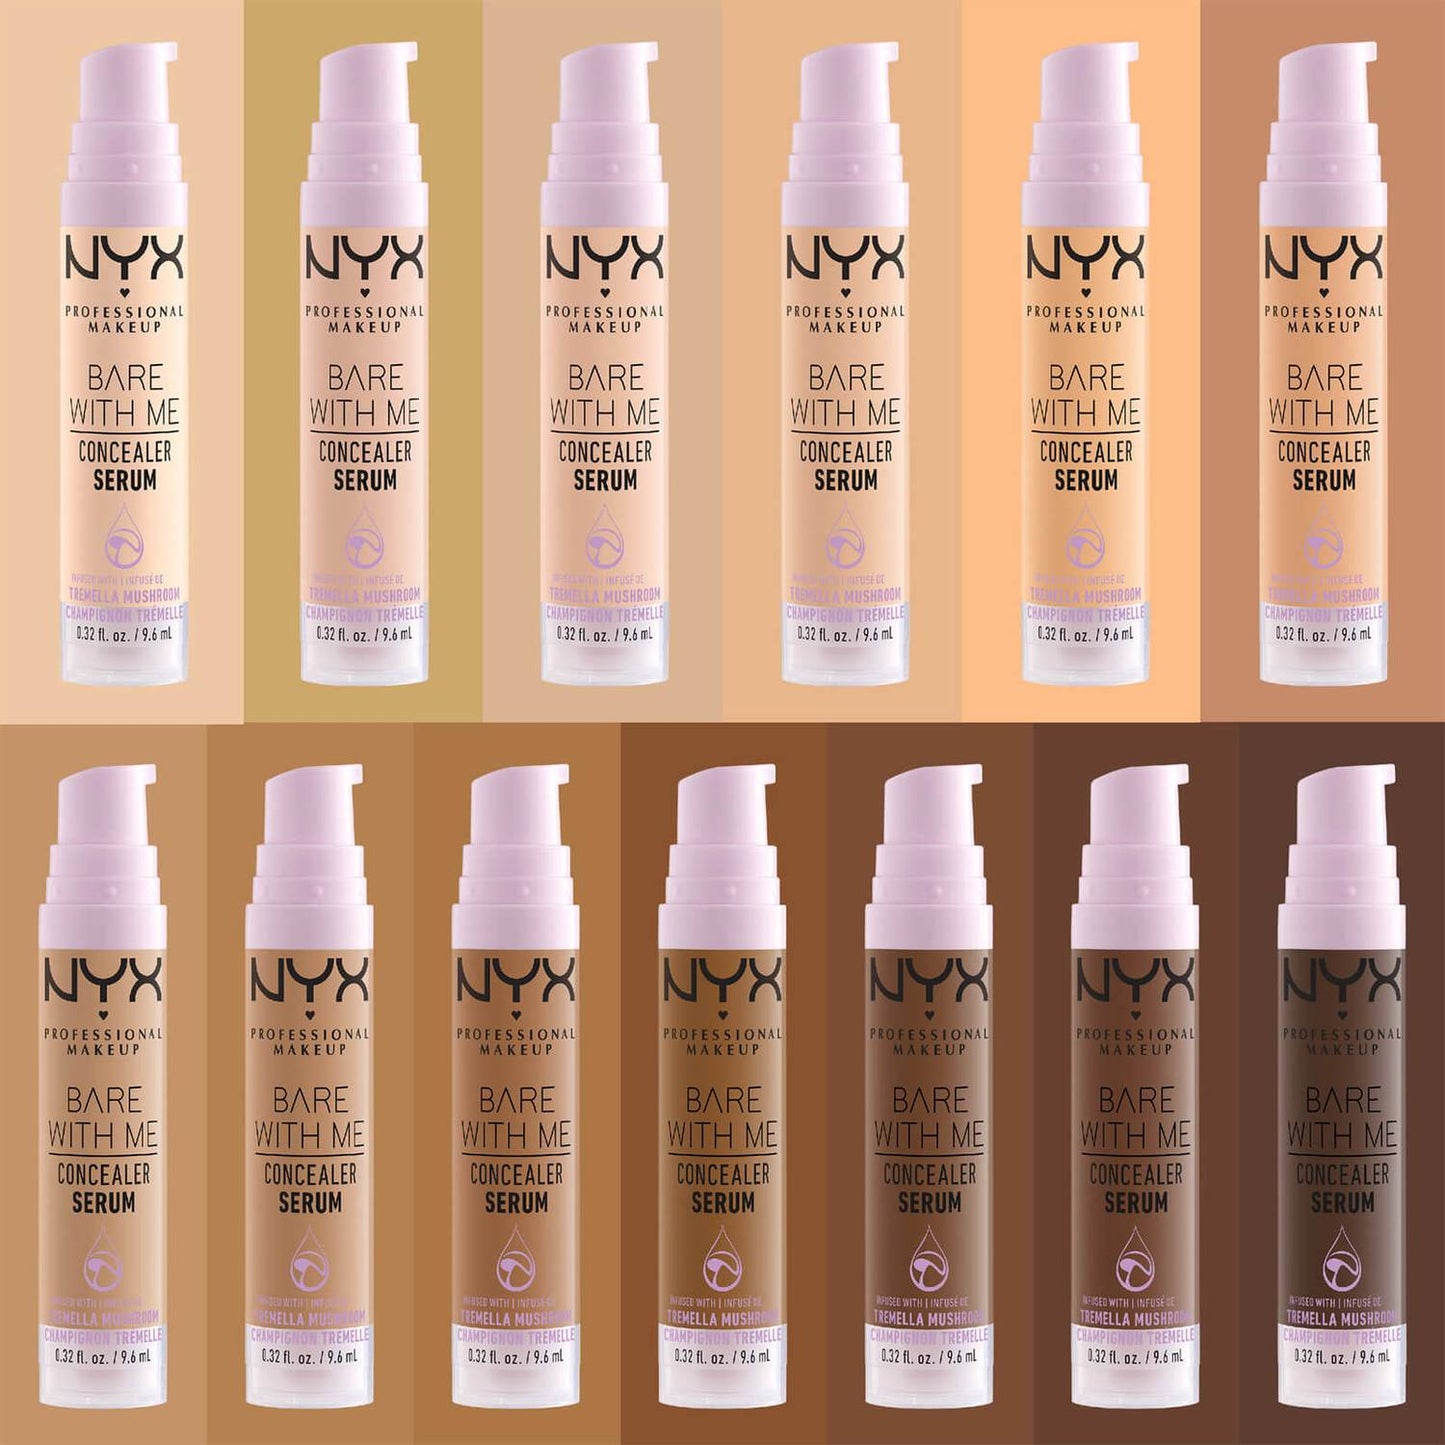 NYX PROFESSIONAL MAKEUP | BARE WITH ME CONCEALER SERUM